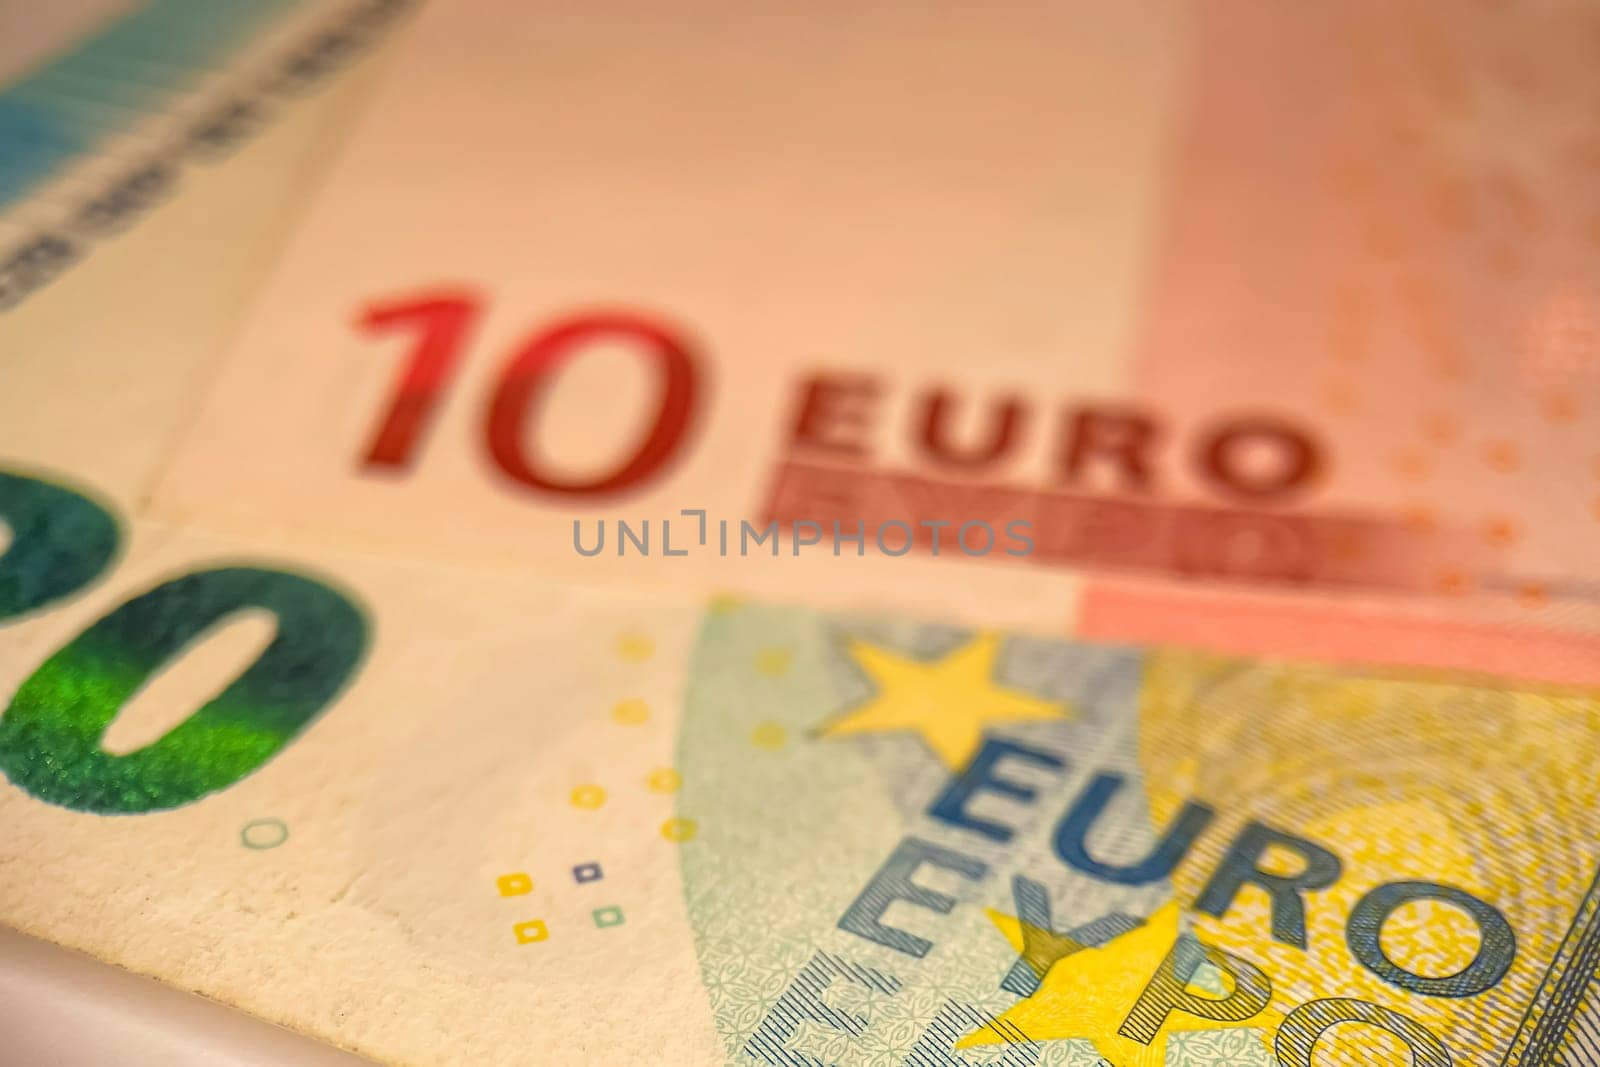 Euro banknotes. Euro, the common currency of the European Union. A financial instrument that plays an important role in the European economy.